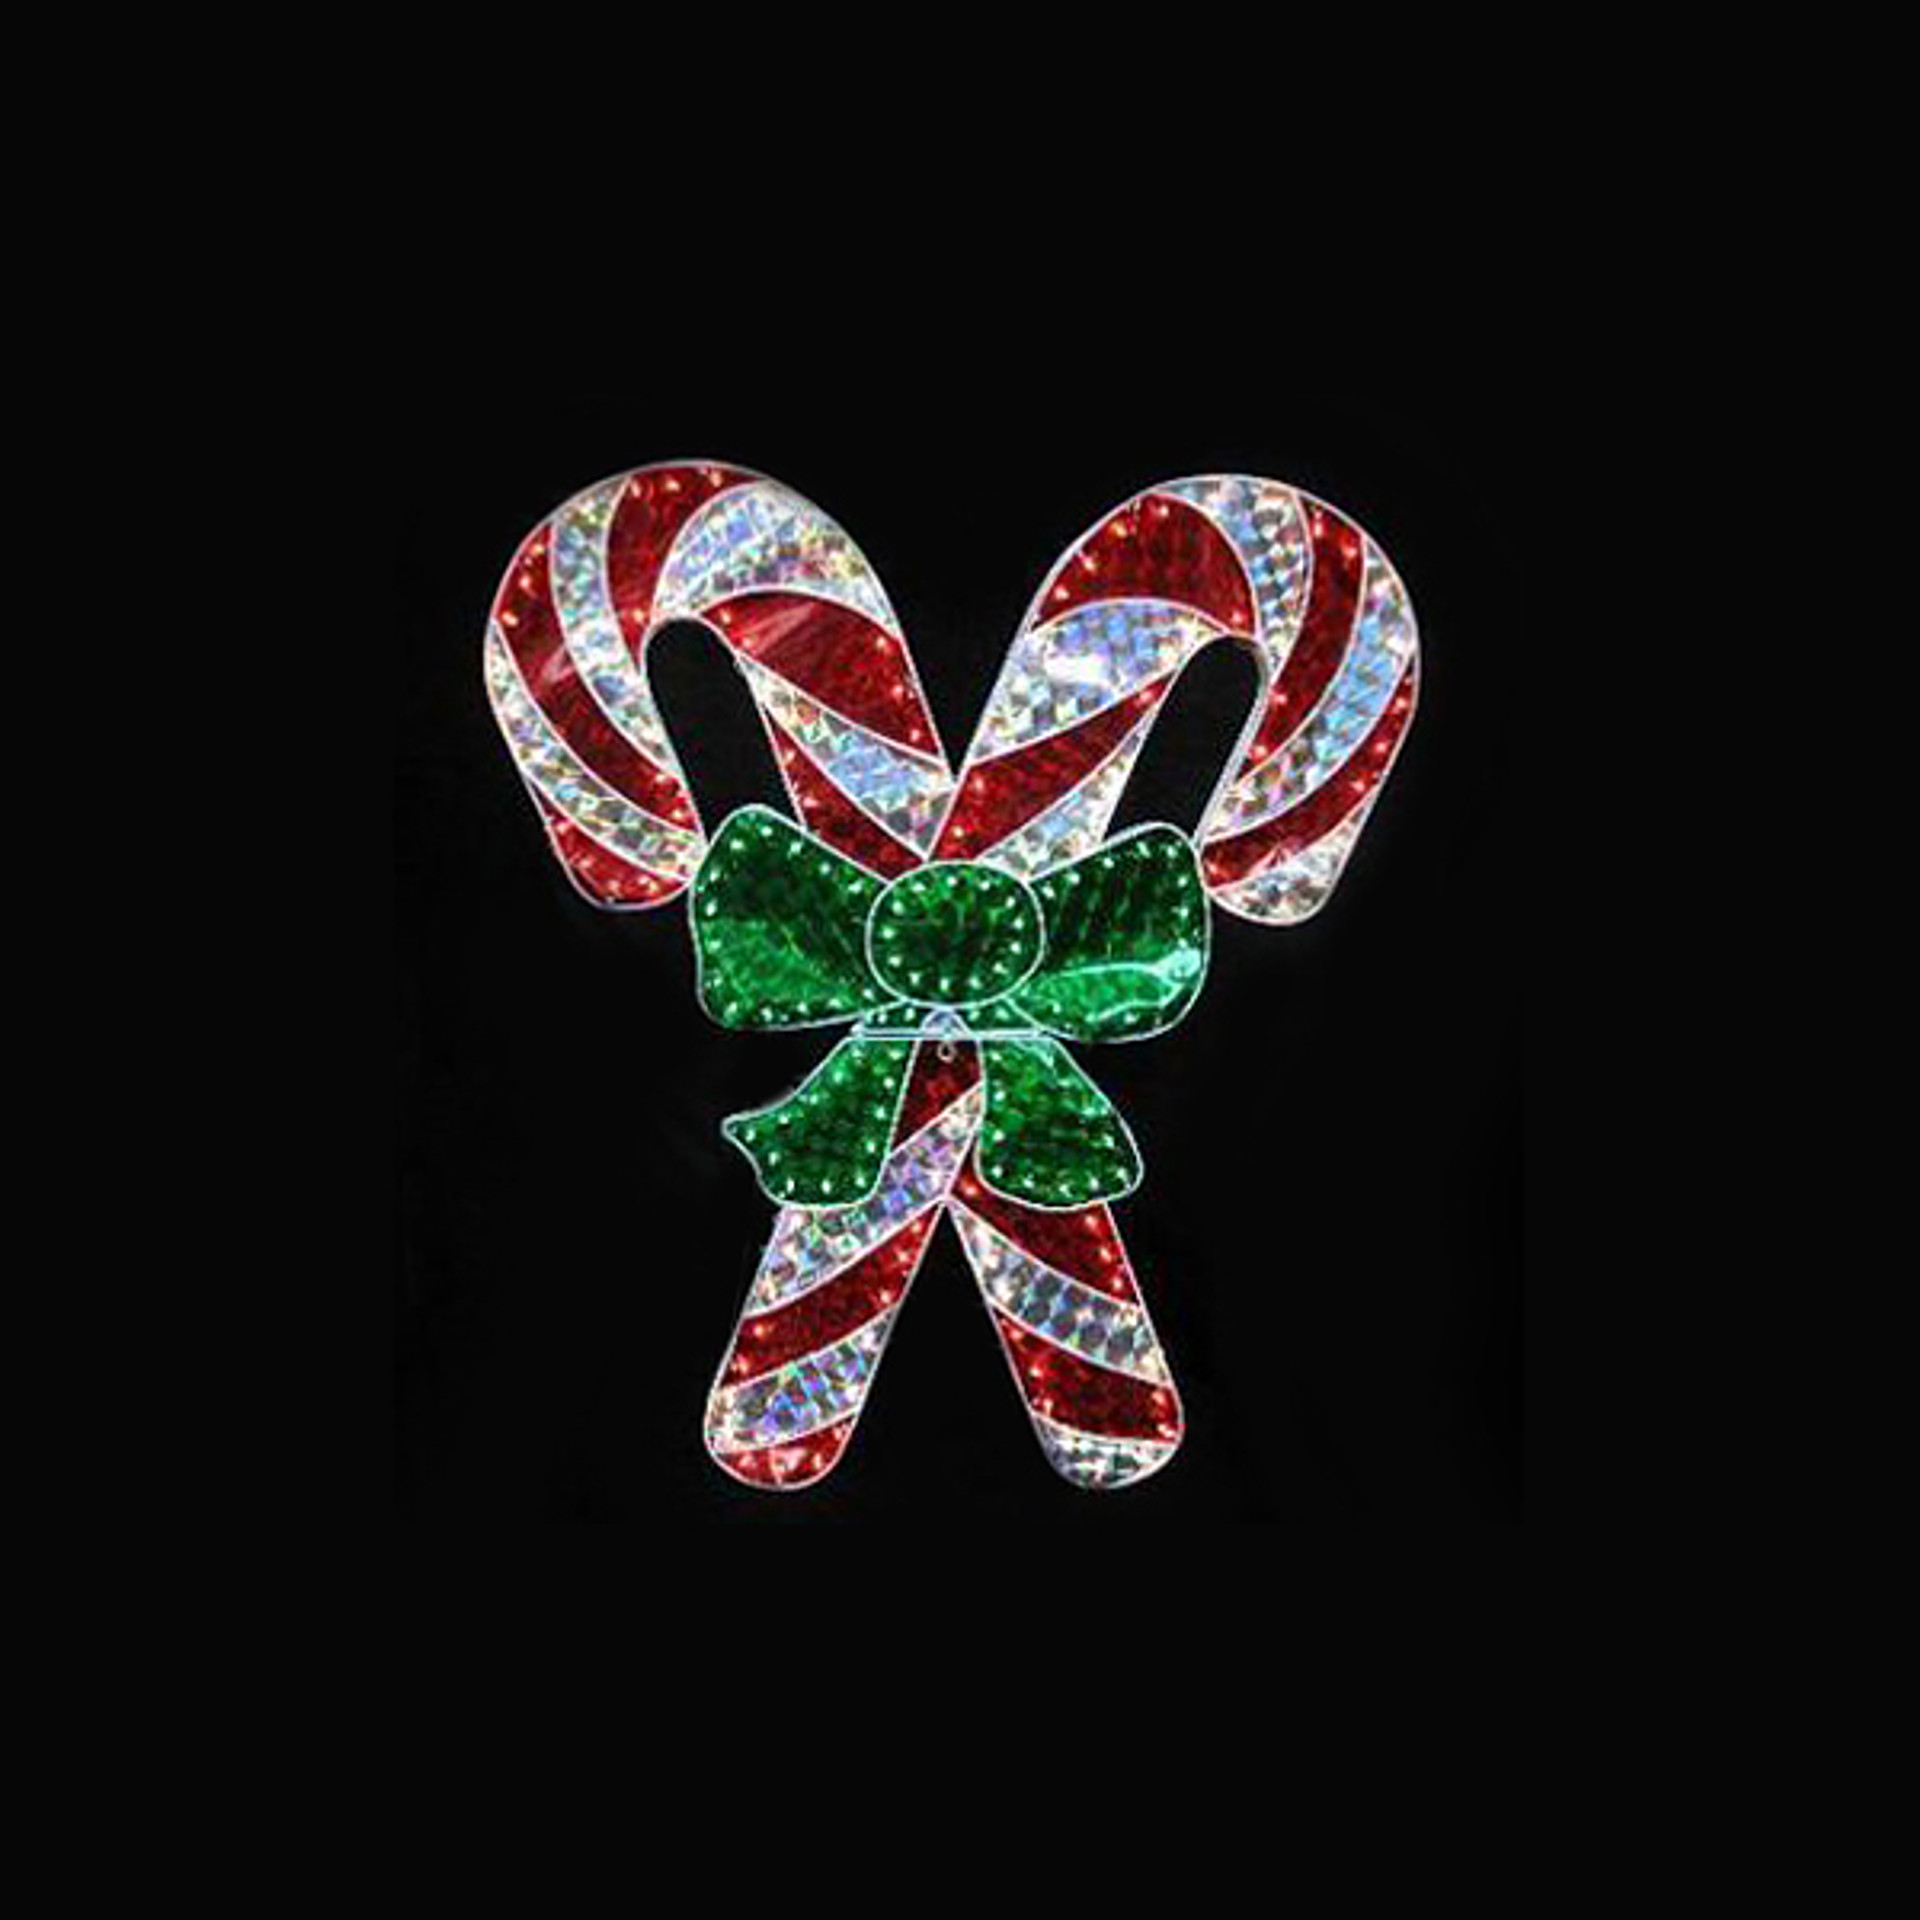 48 Lighted Red And White Candy Cane Outdoor Christmas Window Silhouette